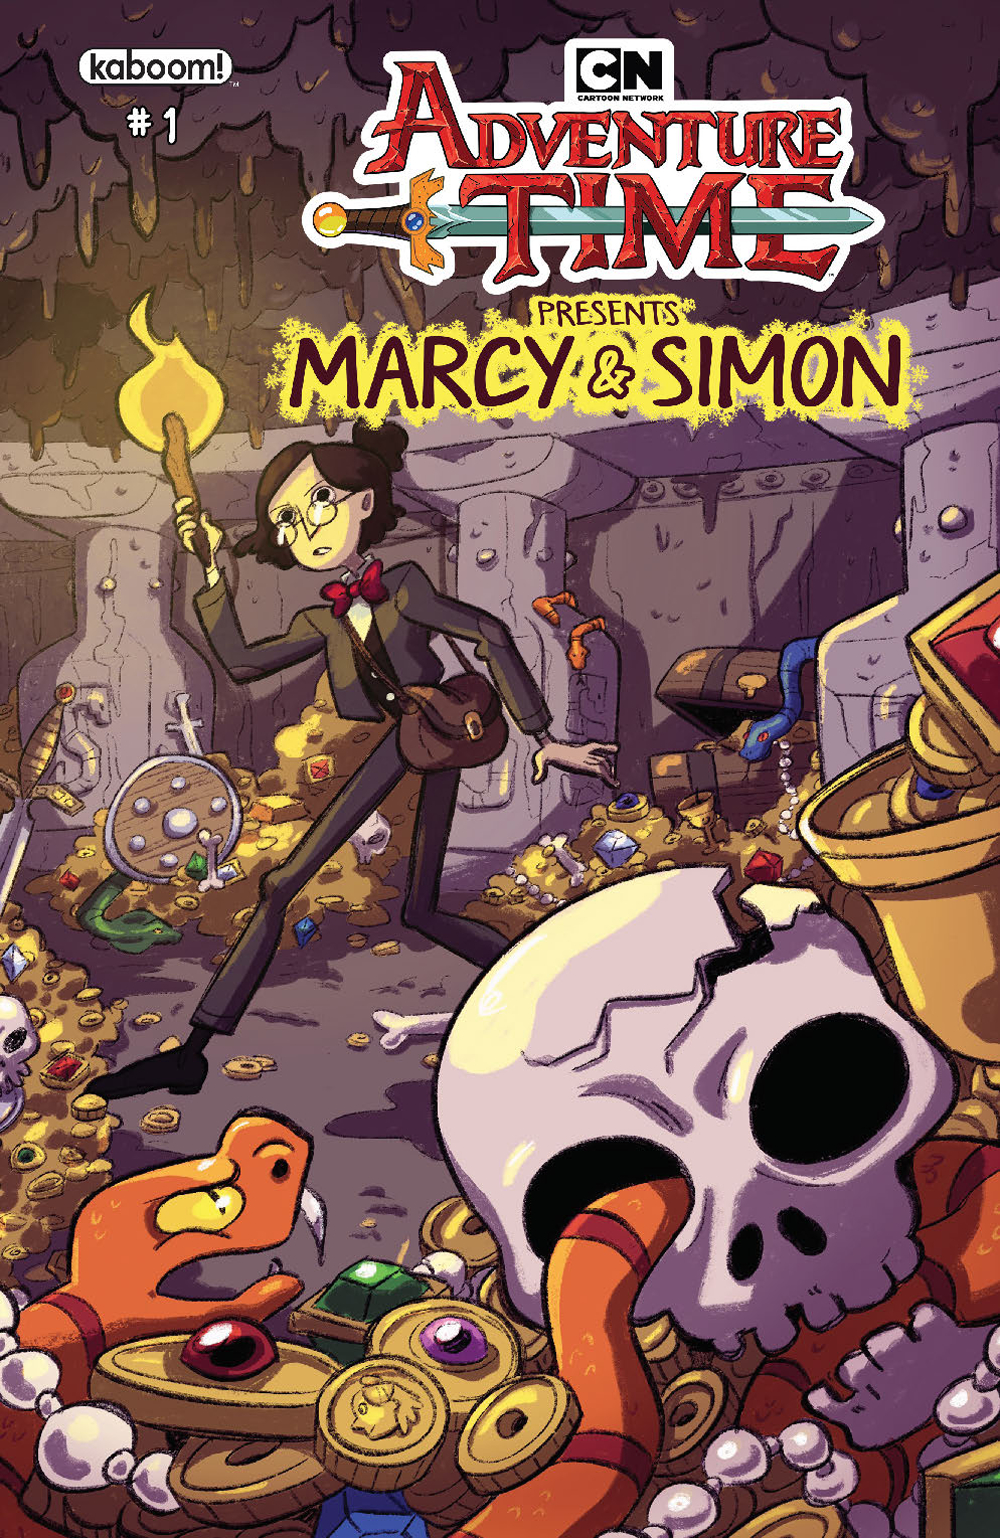 Adventure time marcy and simon comic